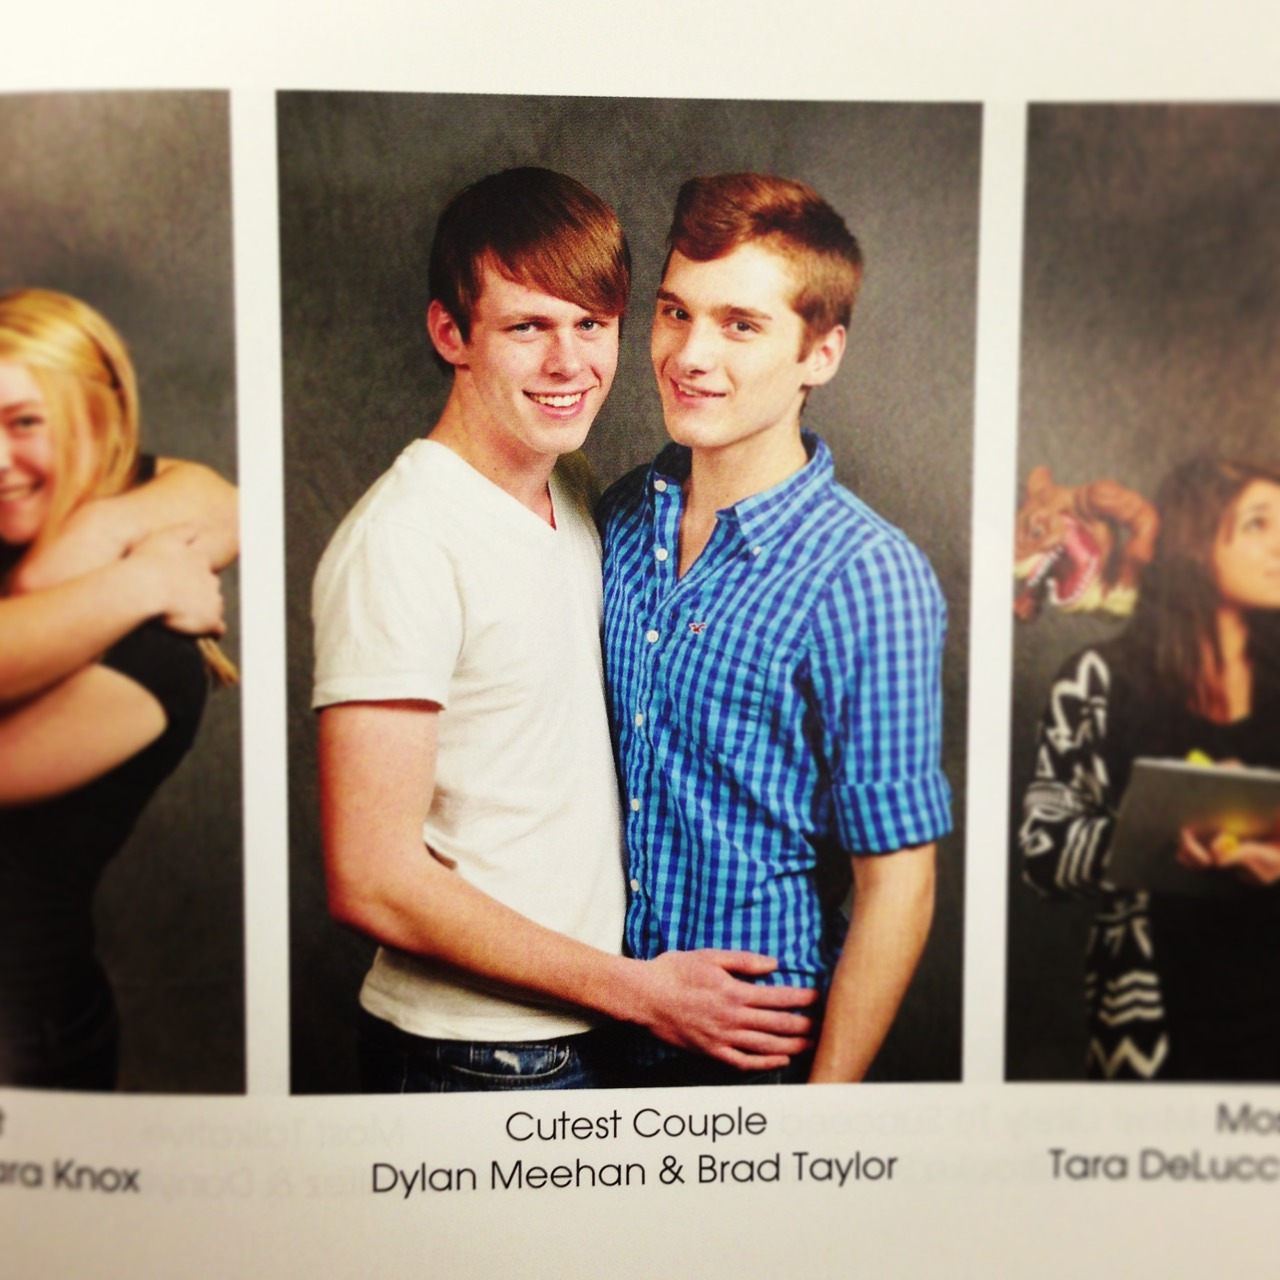 Gay &#8220;Cutest Couple&#8221; yearbook pic goes viral